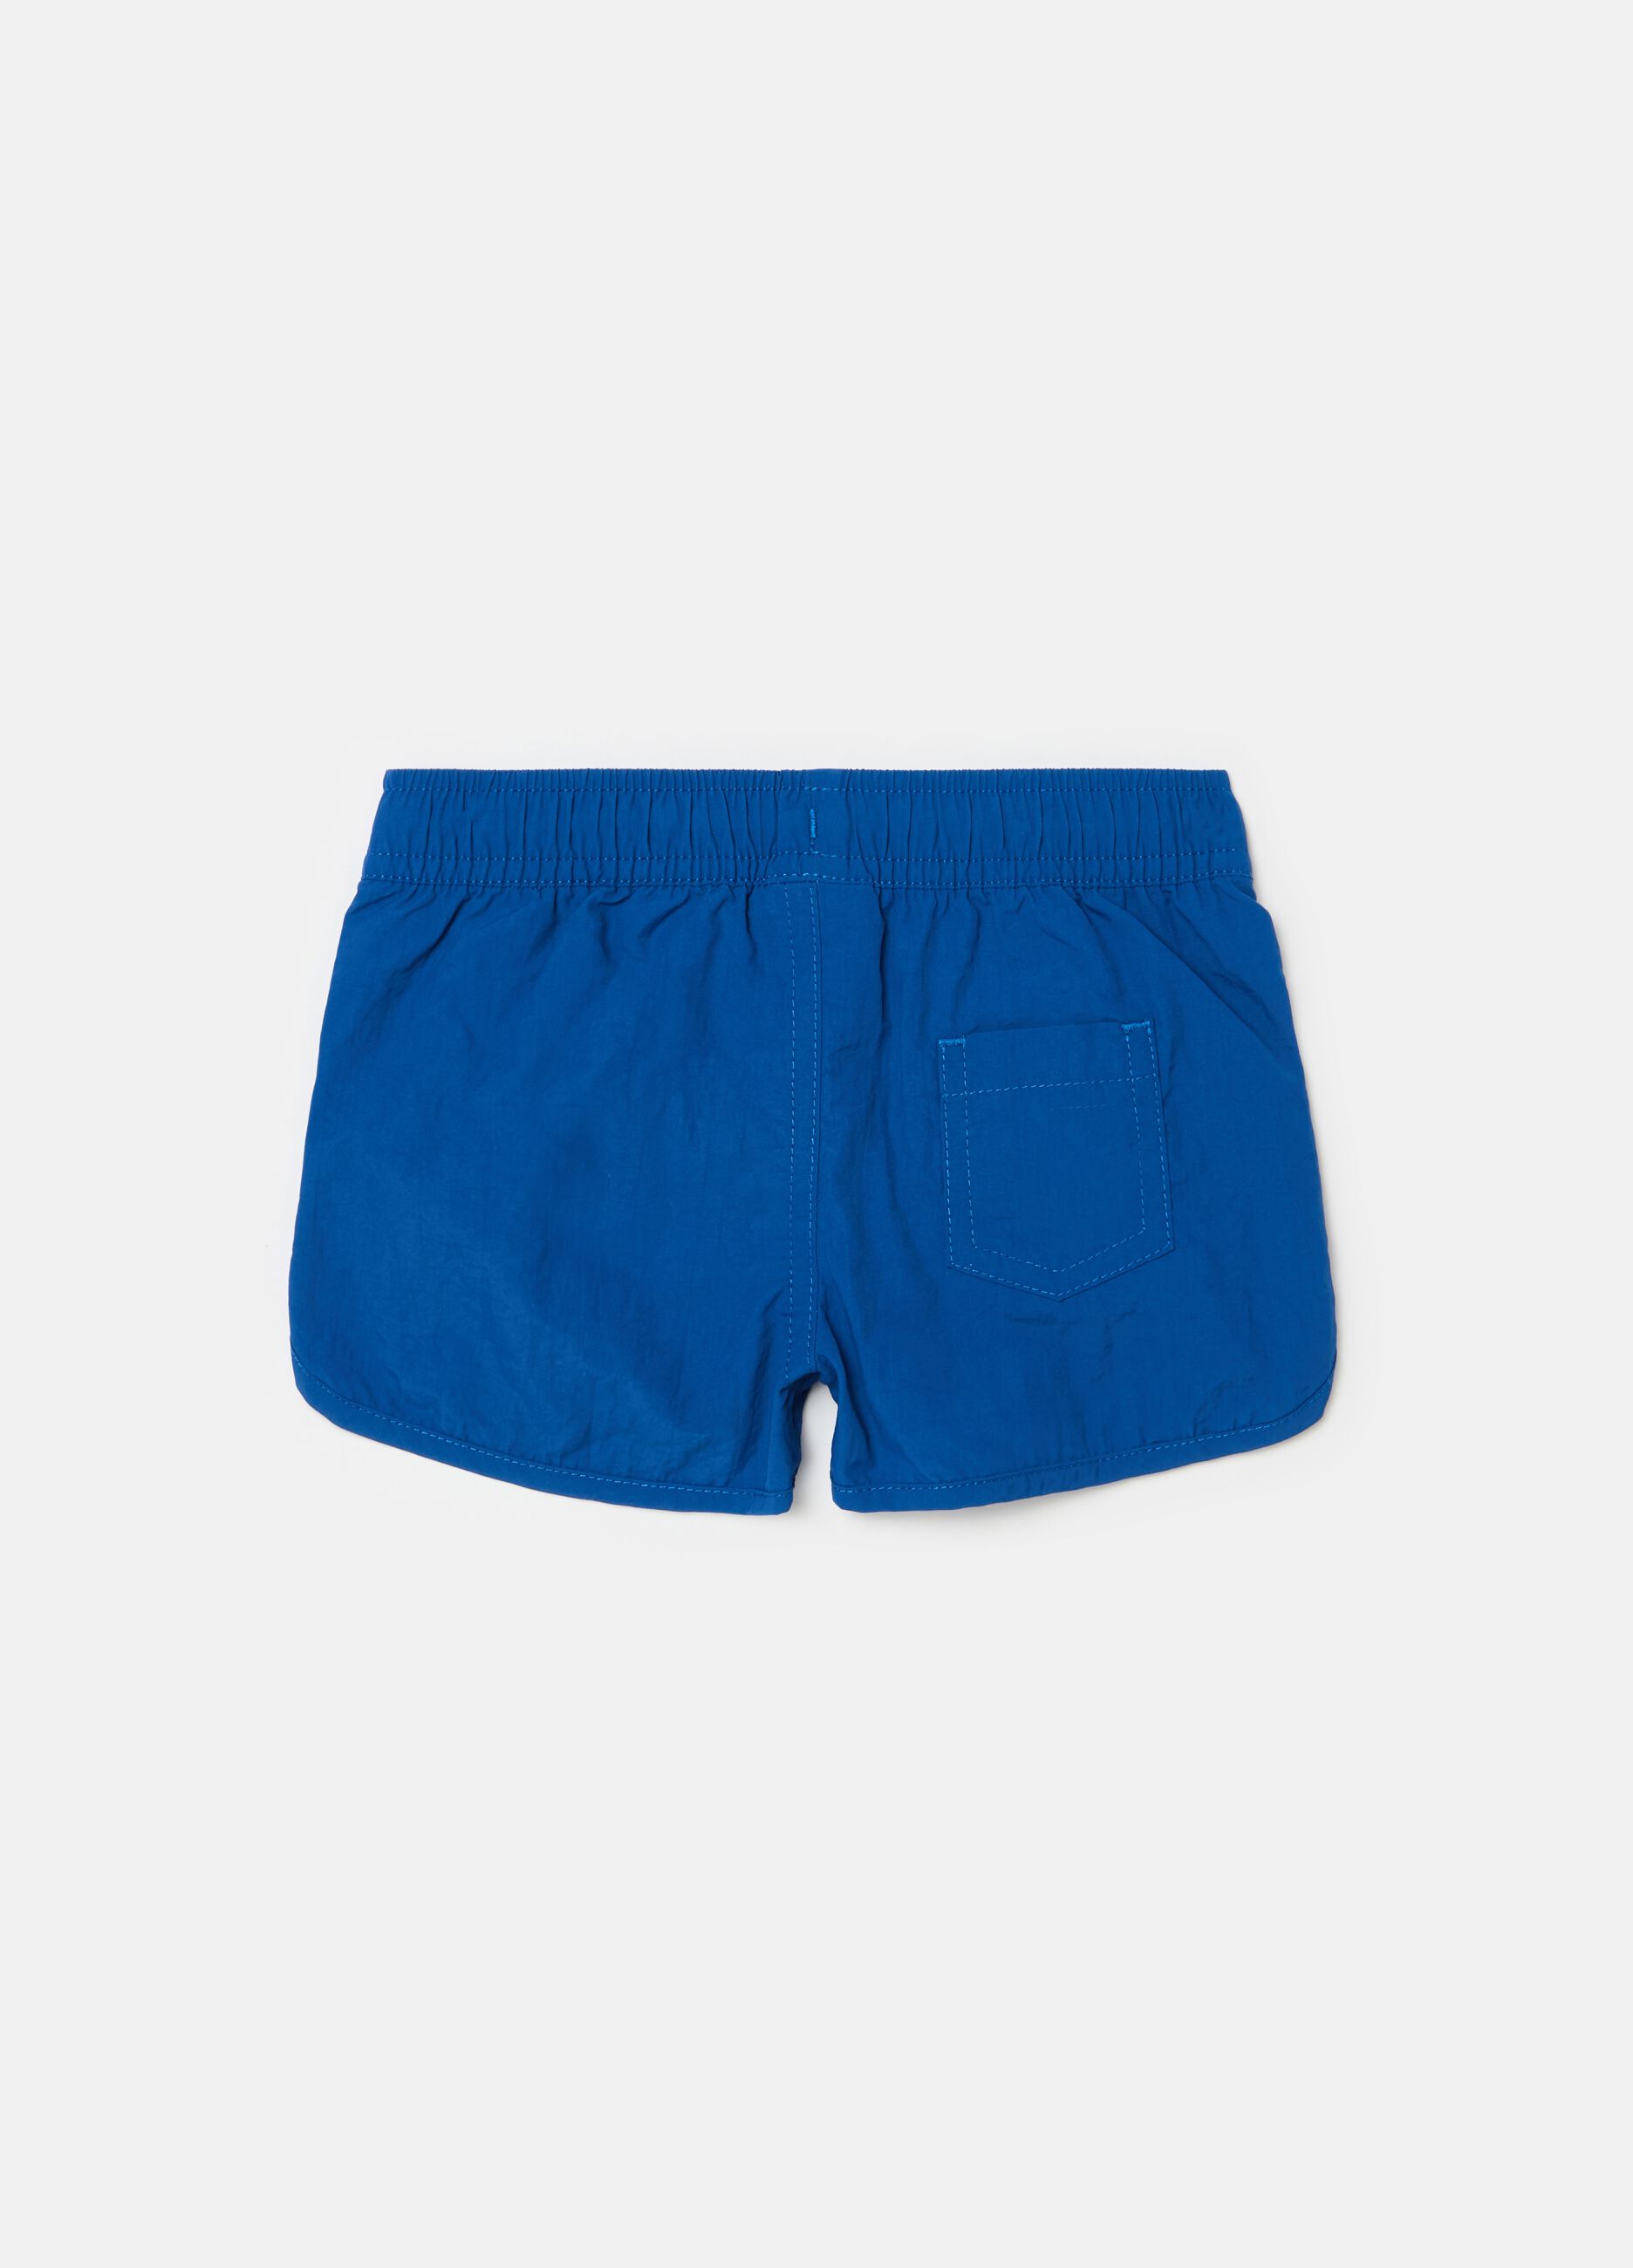 Swimming trunks with drawstring and seagull print